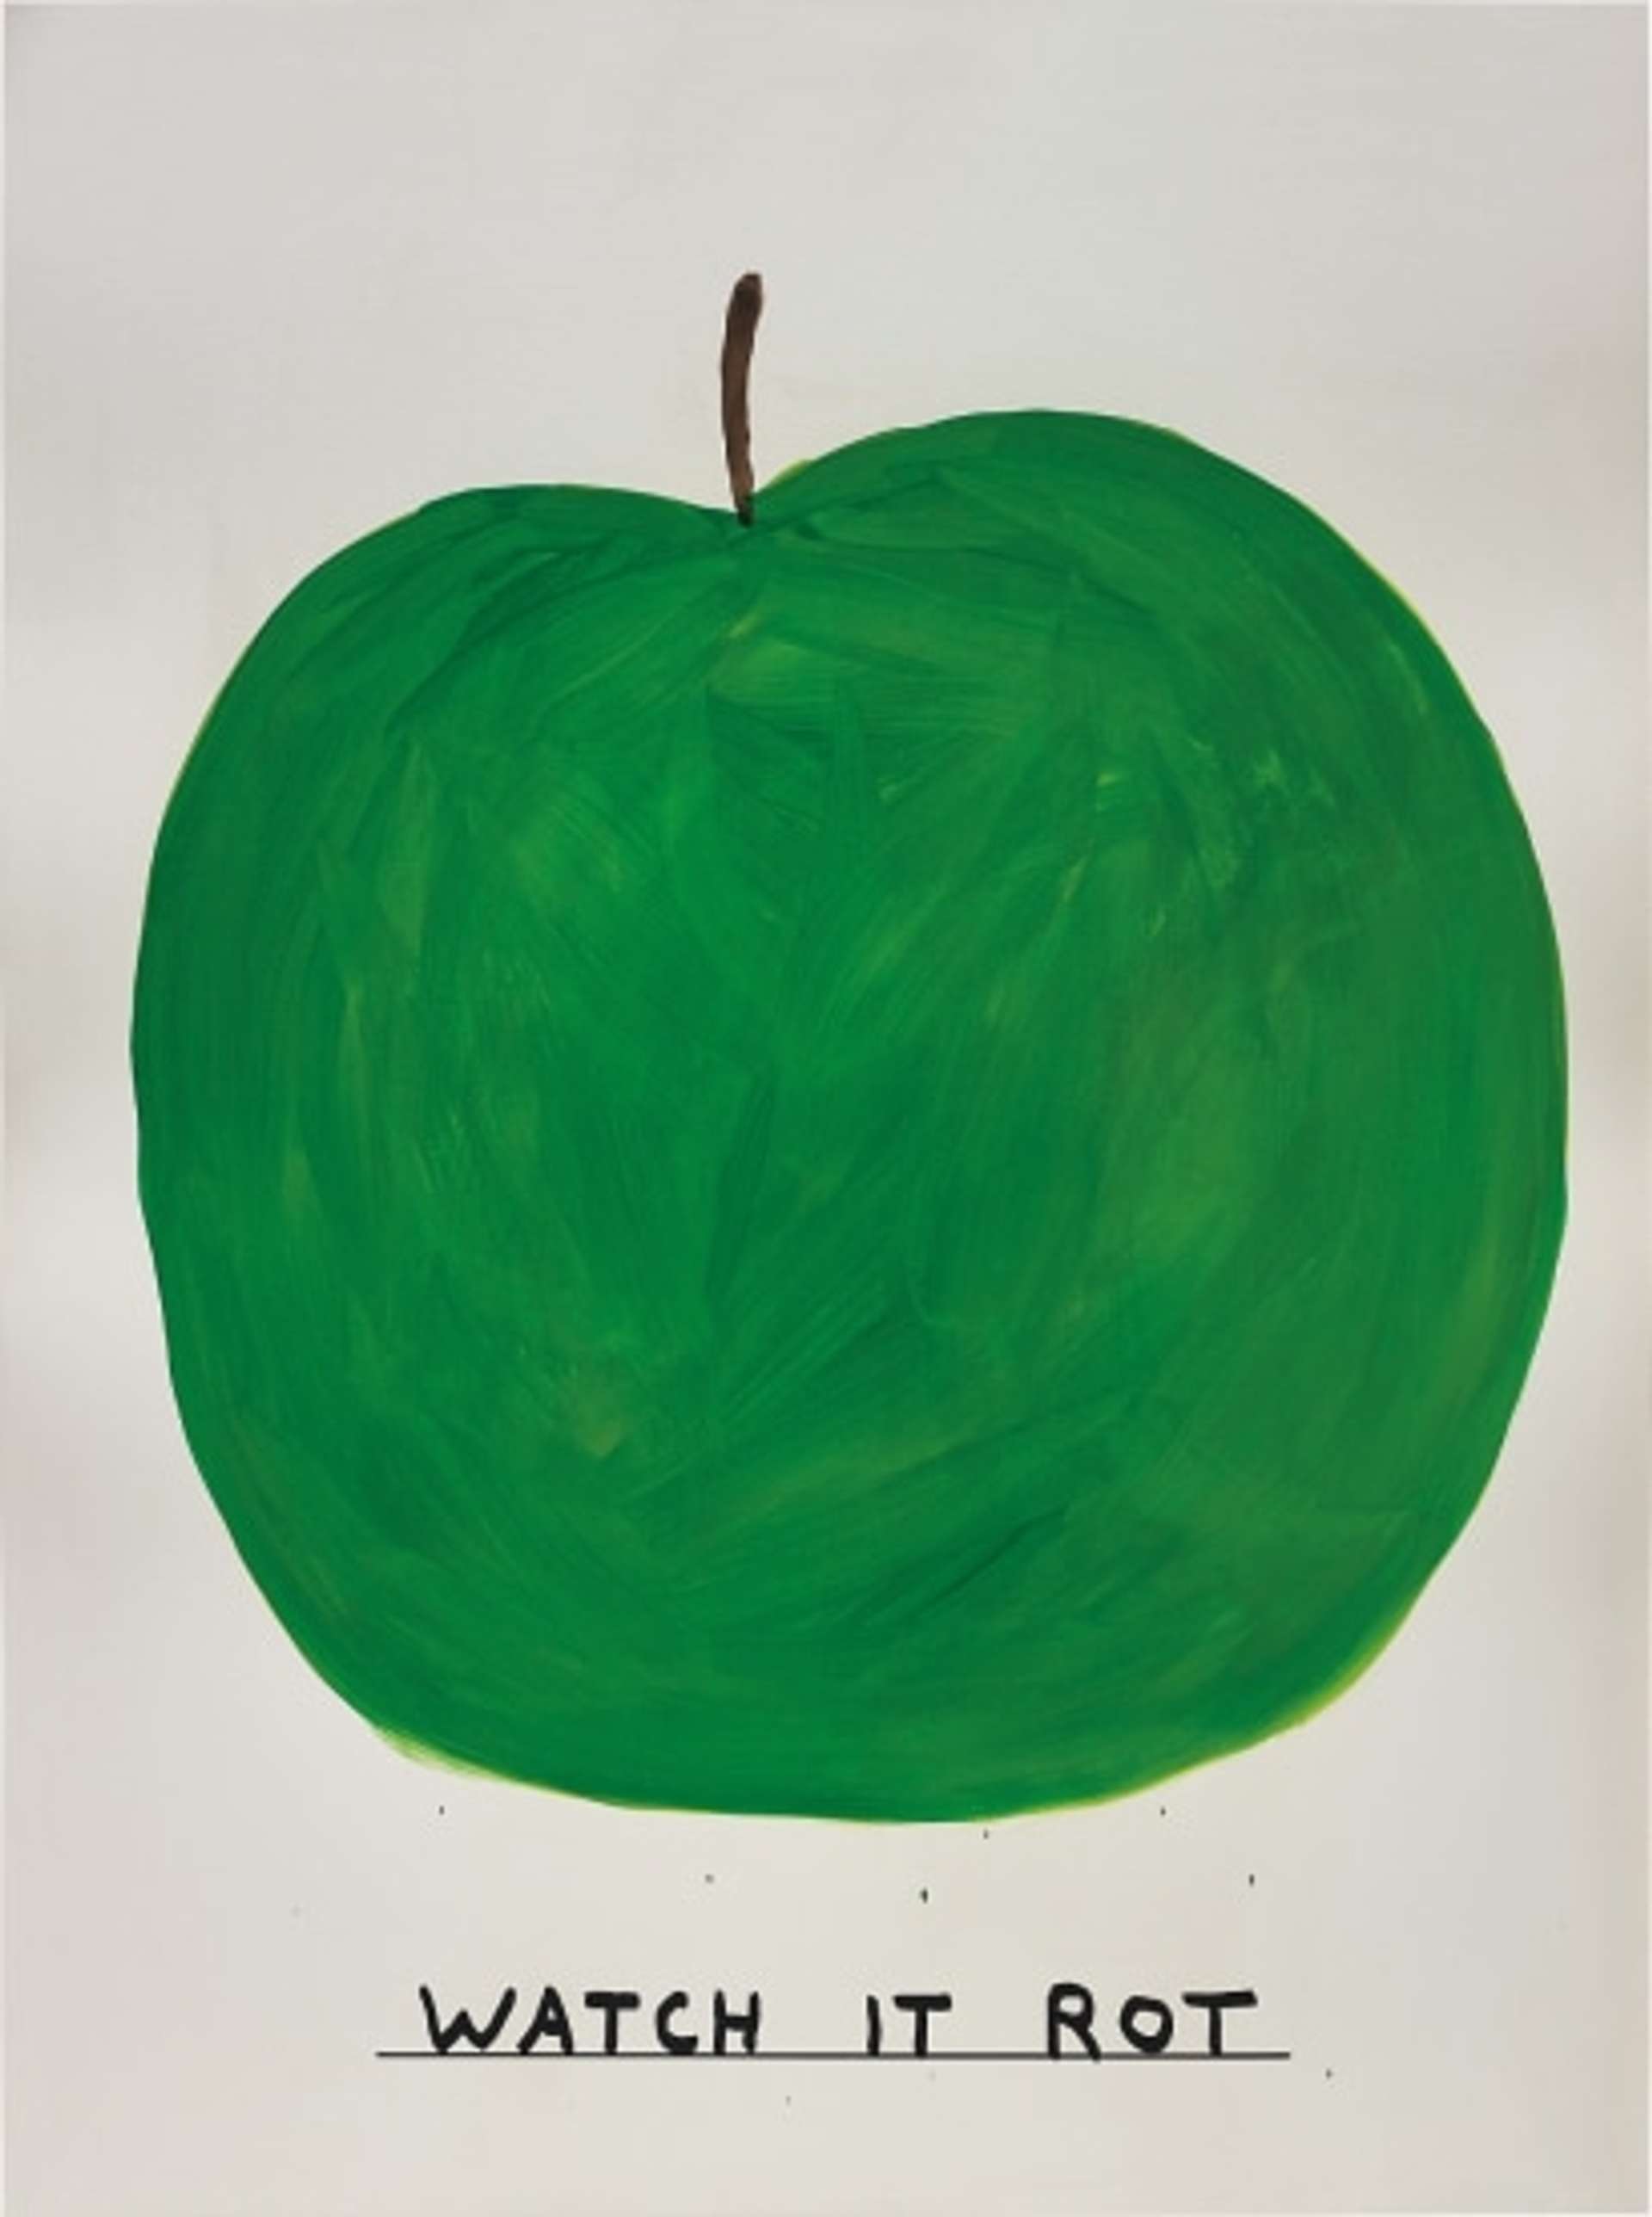 David Shrigley’s Untitled print. A large green apple taking up most of the image with underline text that reads “watch it rot” underneath the apple 